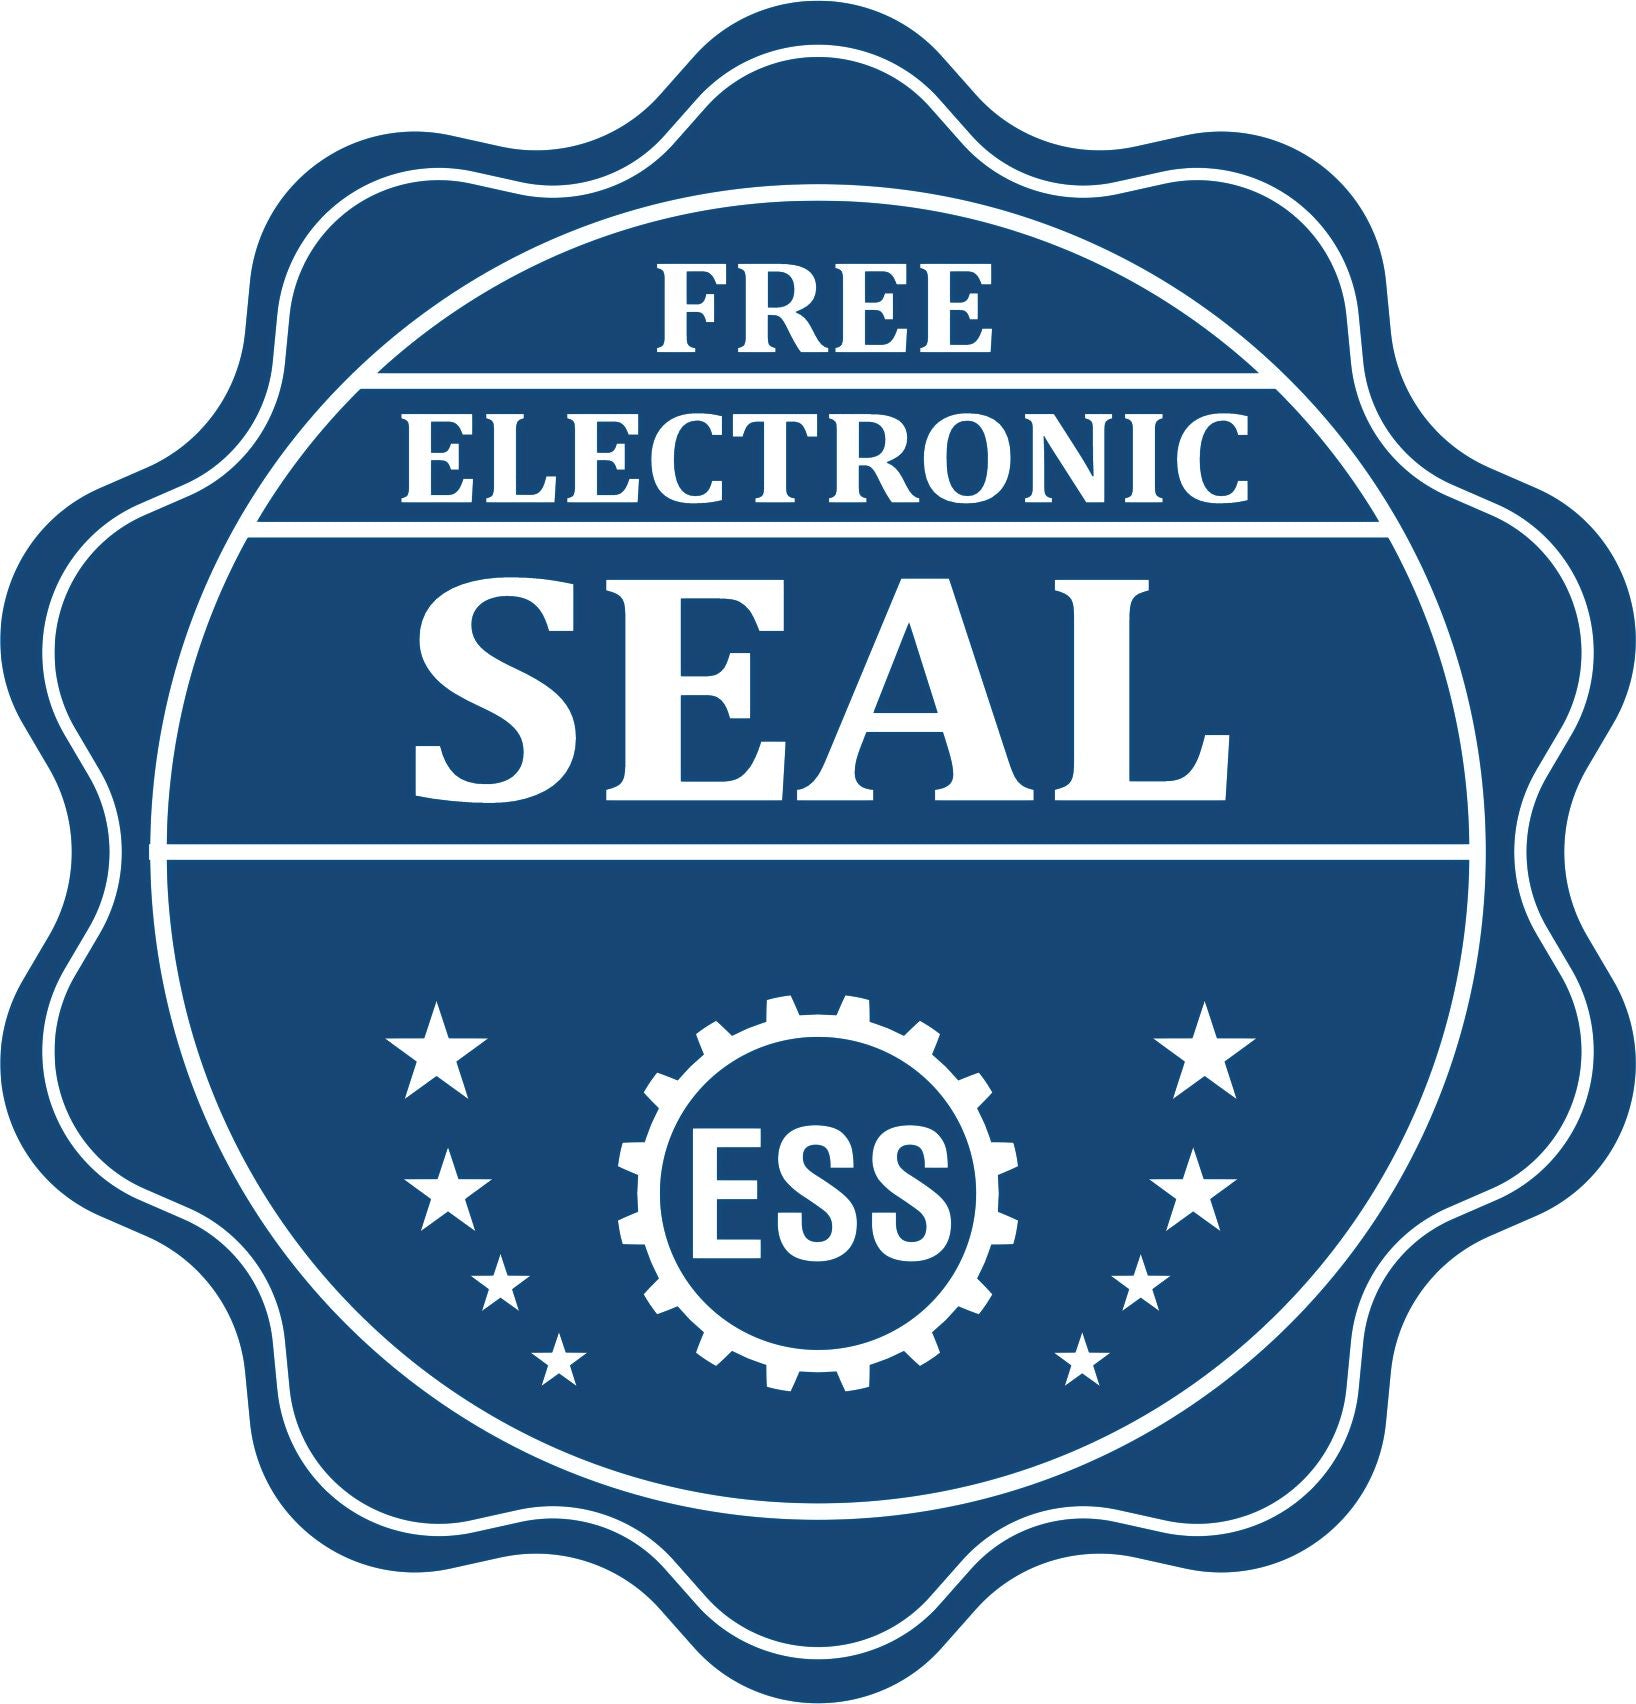 A badge showing a free electronic seal for the Premium MaxLight Pre-Inked Washington Engineering Stamp with stars and the ESS gear on the emblem.